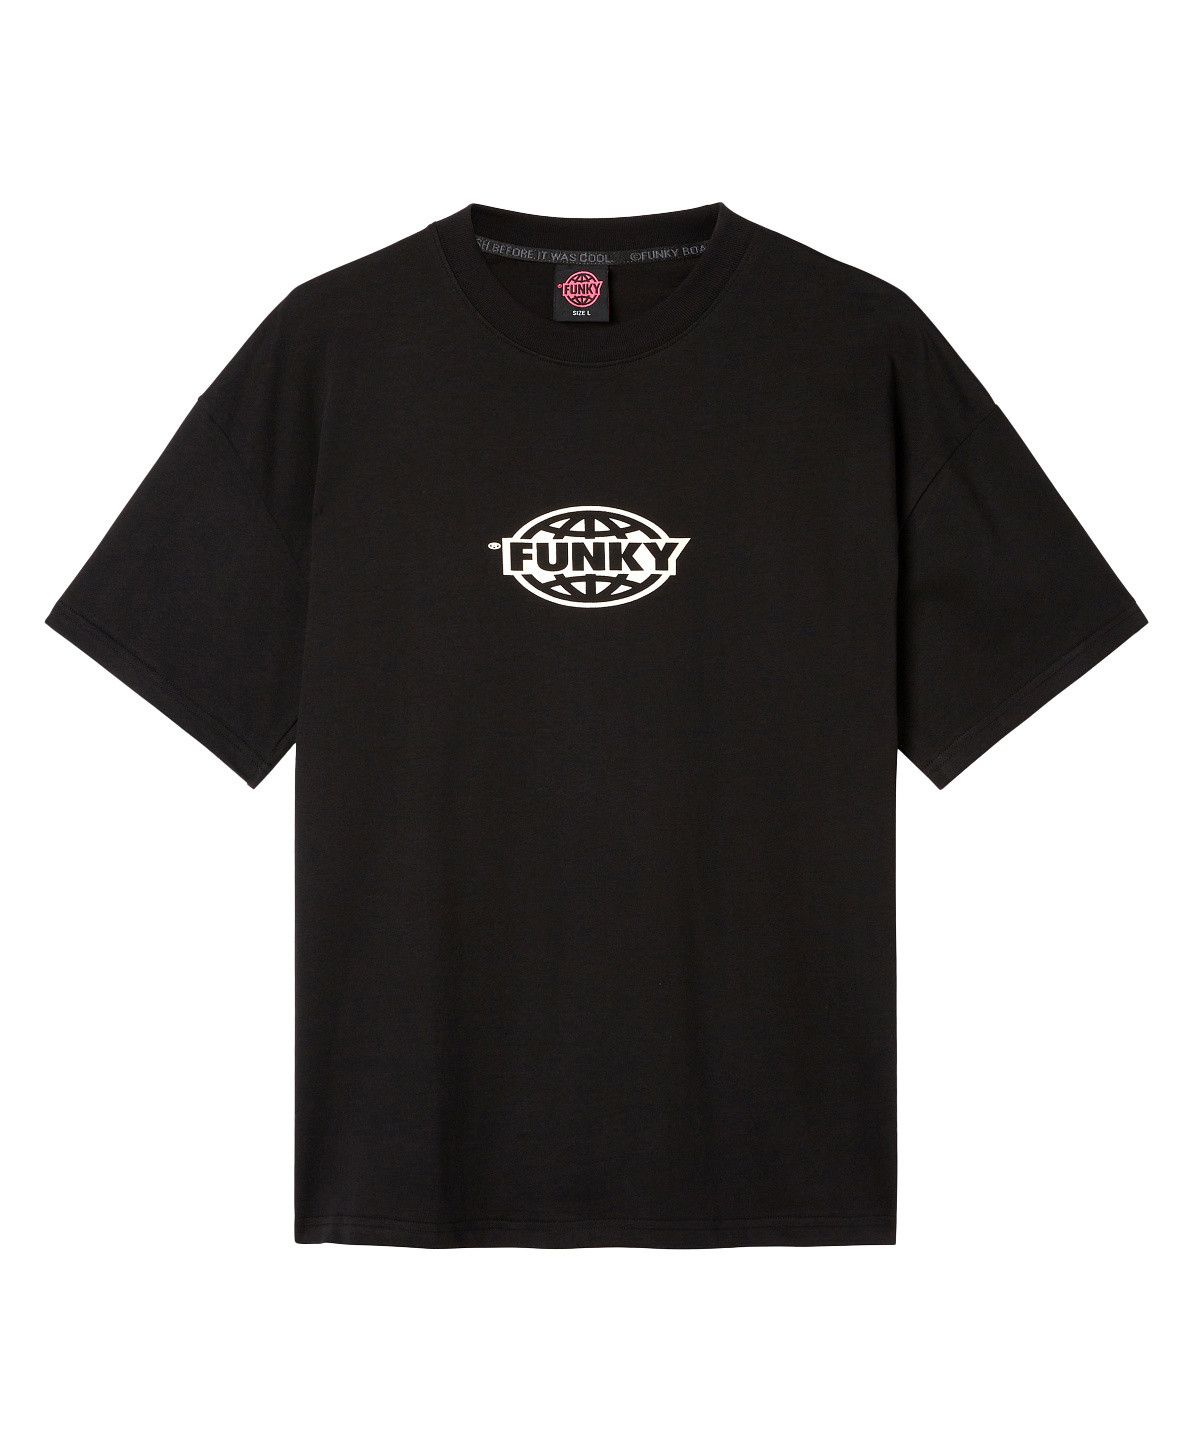 Funky - Crew-neck T-shirt with oval logo, Black, large image number 0